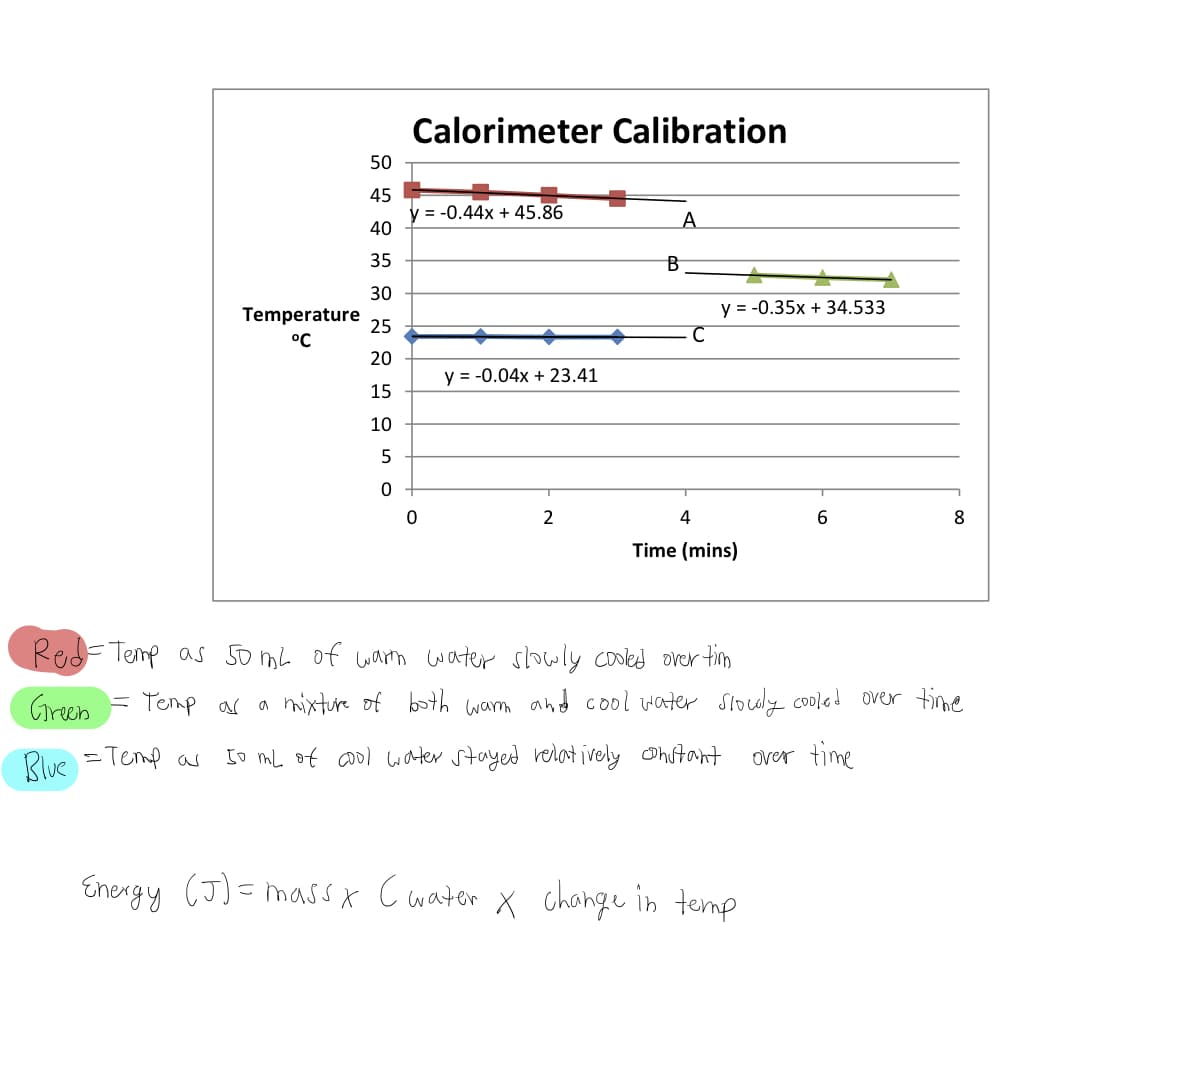 Calorimeter Calibration
50
45
y = -0.44x + 45.86
40
A.
35
B
30
y = -0.35x + 34.533
Temperature
25
°C
20
y = -0.04x + 23.41
15
10
5
2
4
6
8
Time (mins)
Red=Temp as 5o mL of warn water slowly cooled over tim
Green = Temp as a mixture of both wam and cool water Slouly cooled over tme
Rlue =Temp as
[o mL of co0l water stayed relat ively Ohutant
over time
Energy (J)= massx C water X chonge in temp
